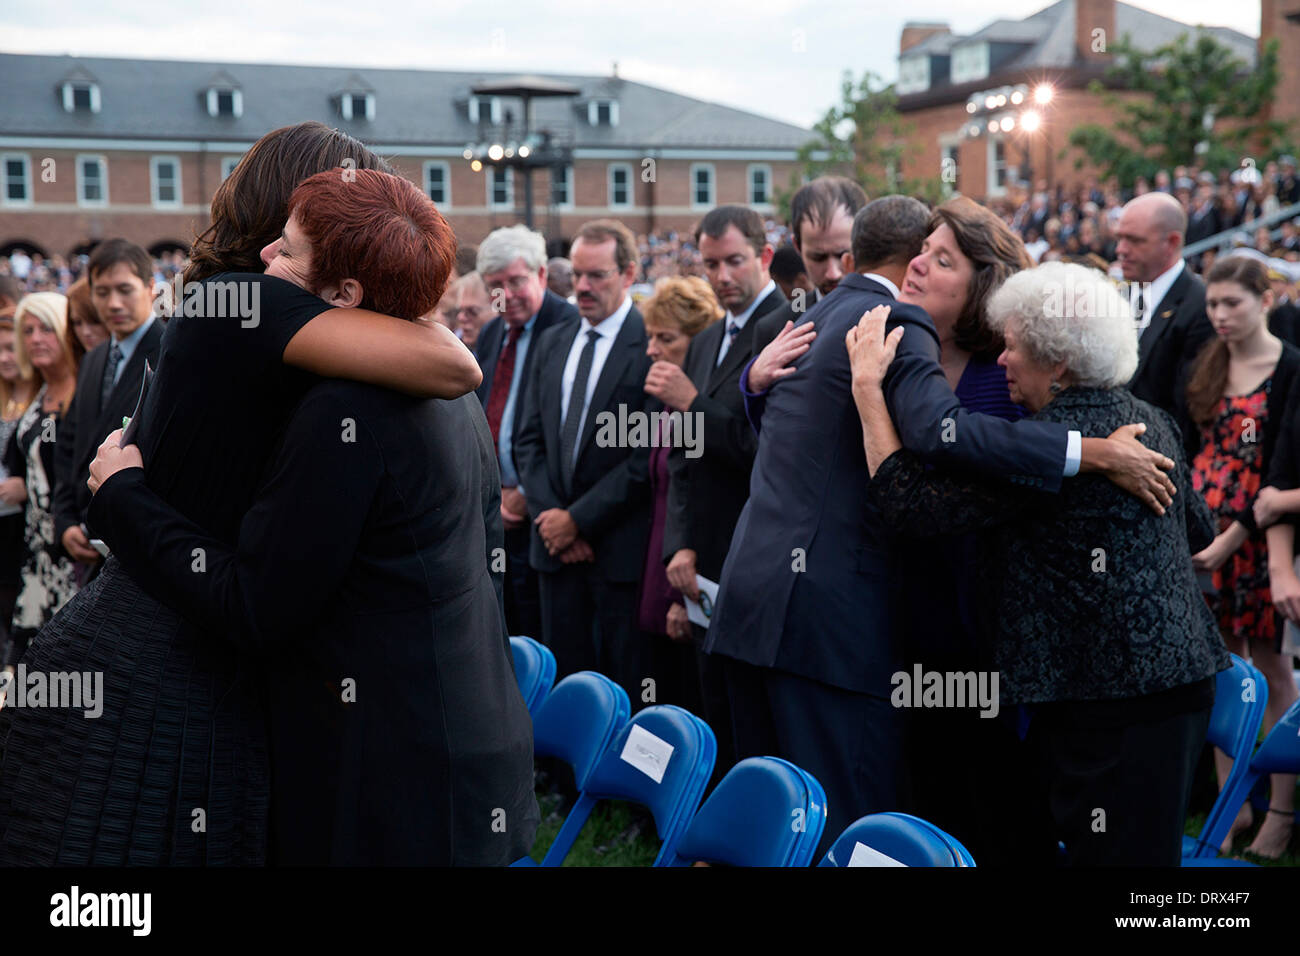 US President Barack Obama and First Lady Michelle Obama greet family members during a memorial service for victims of the Washington Navy Yard shootings at the Parade Grounds, Marine Barracks September 22, 2013 in Washington, DC. Stock Photo